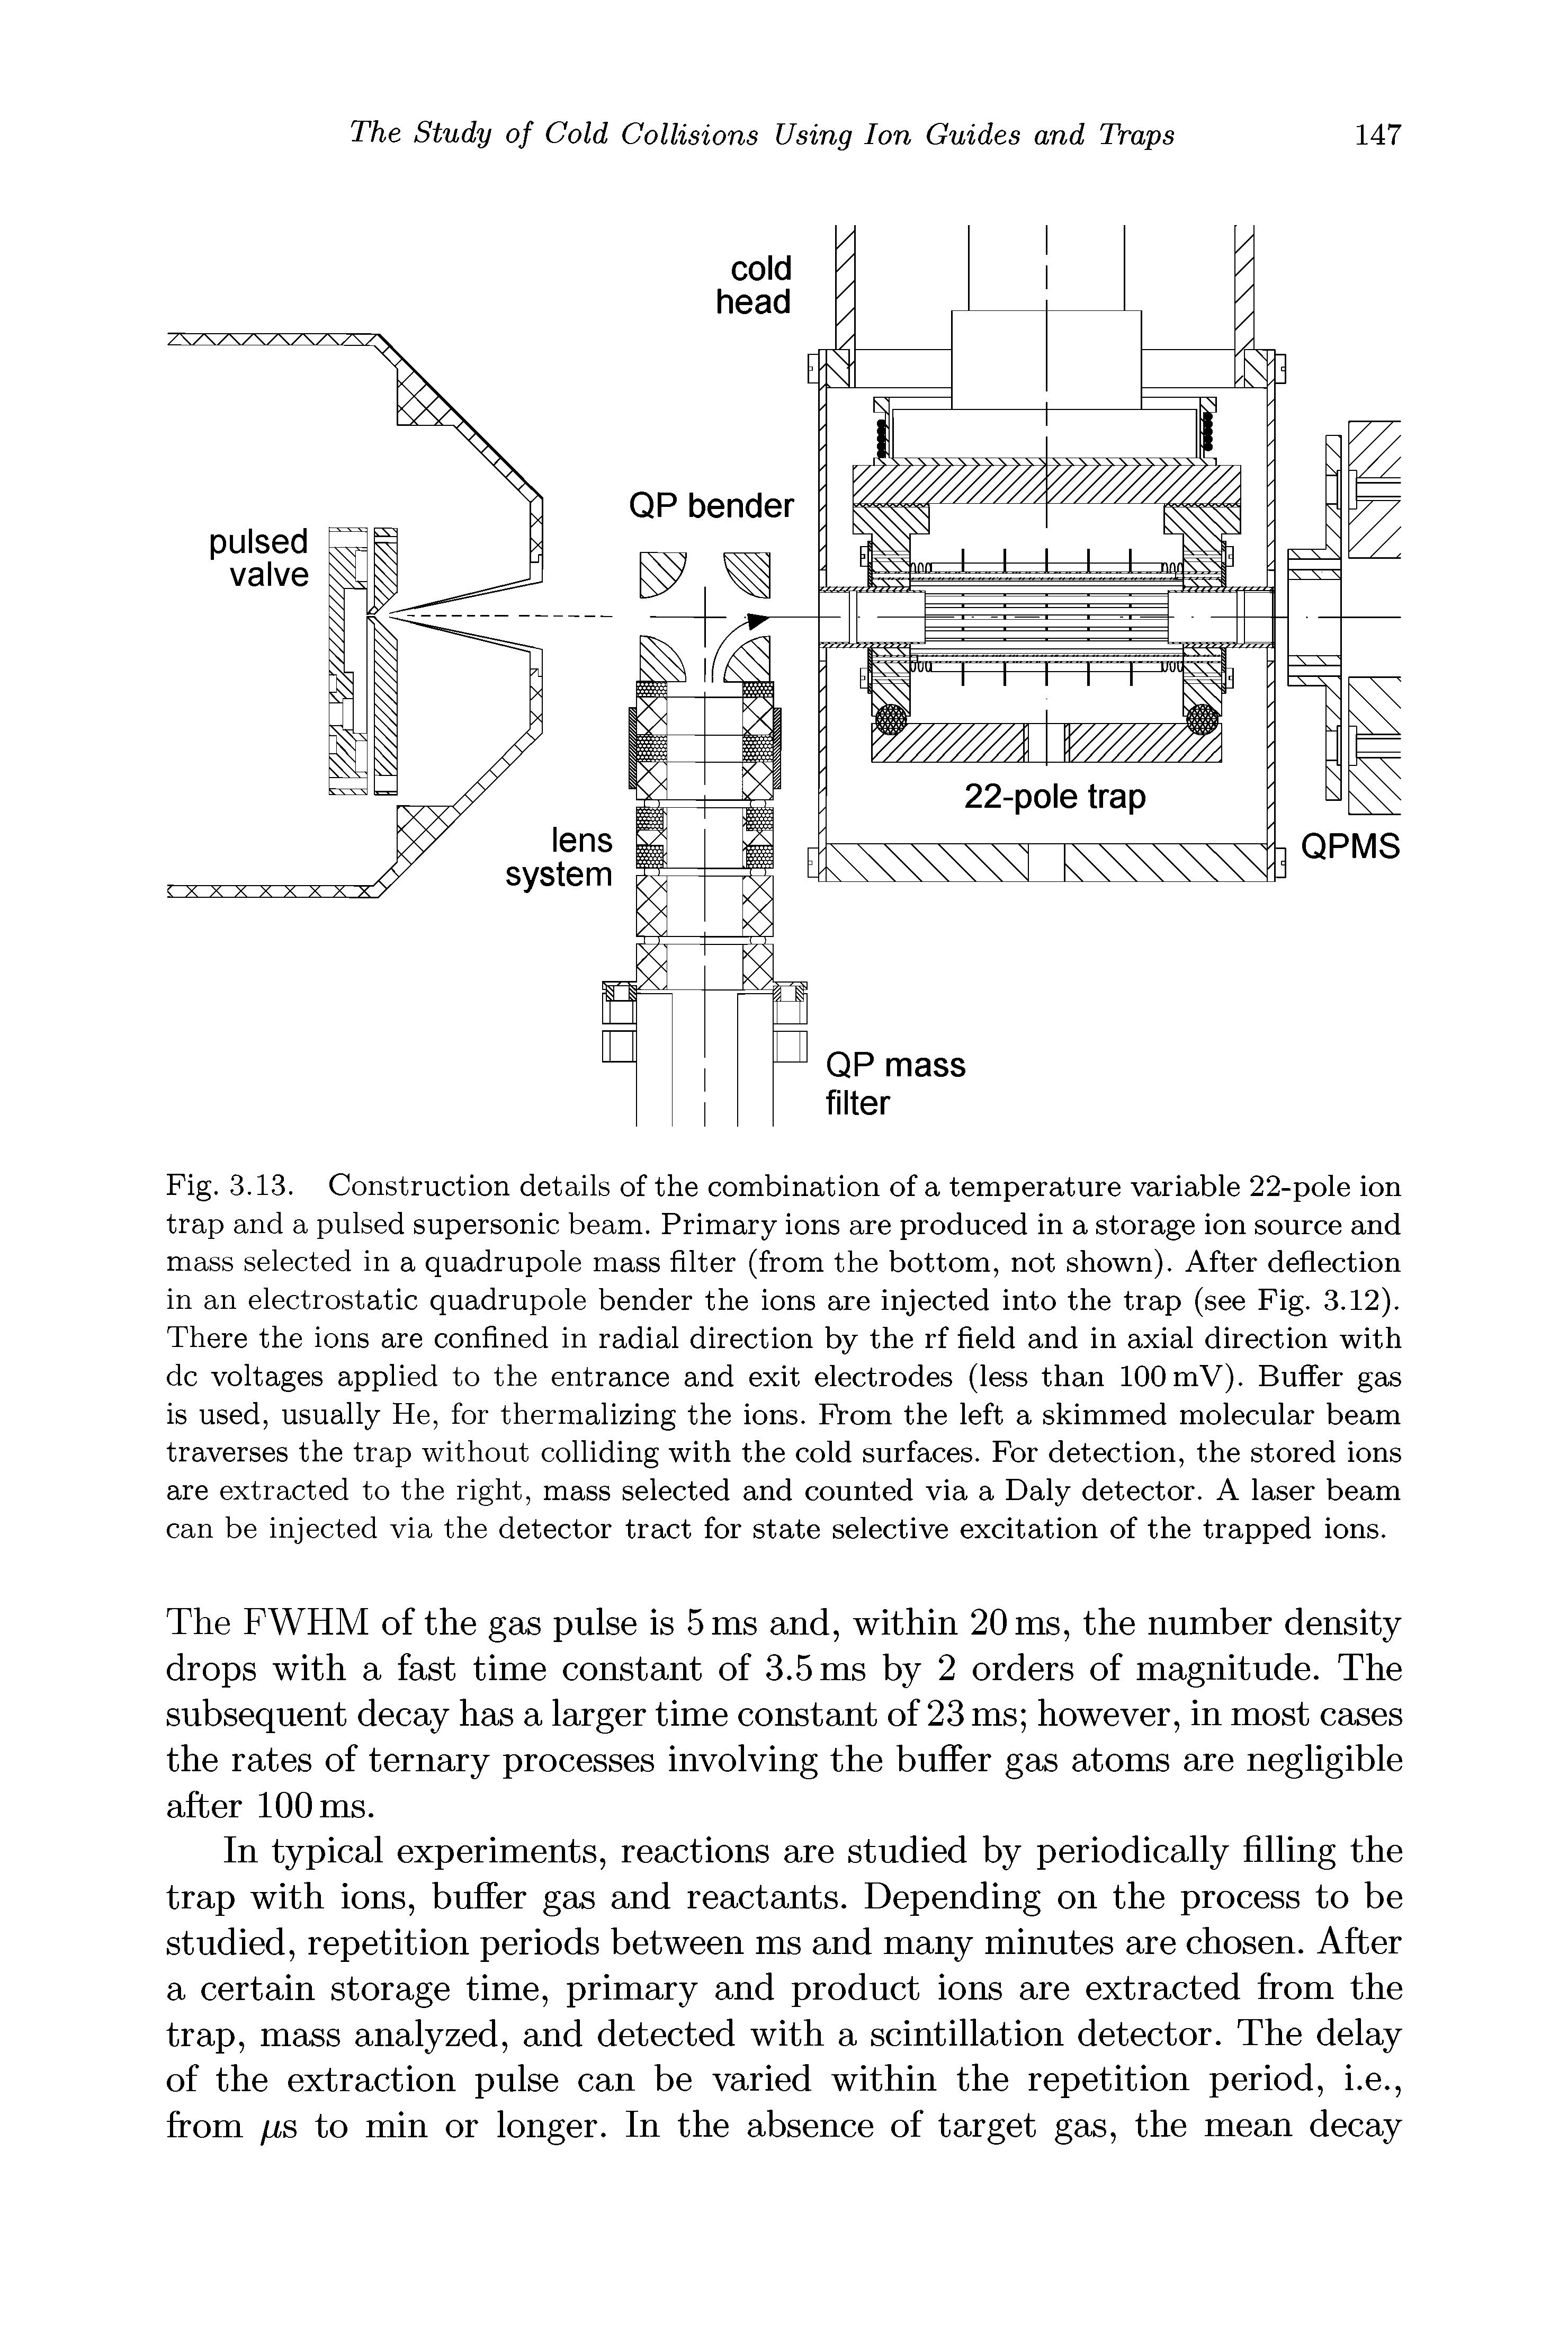 Fig. 3.13. Construction details of the combination of a temperature variable 22-pole ion trap and a pulsed supersonic beam. Primary ions are produced in a storage ion source and mass selected in a quadrupole mass filter (from the bottom, not shown). After deflection in an electrostatic quadrupole bender the ions are injected into the trap (see Fig. 3.12). There the ions are confined in radial direction by the rf field and in axial direction with dc voltages applied to the entrance and exit electrodes (less than 100 mV). Buffer gas is used, usually He, for thermalizing the ions. From the left a skimmed molecular beam traverses the trap without colliding with the cold surfaces. For detection, the stored ions are extracted to the right, mass selected and counted via a Daly detector. A laser beam can be injected via the detector tract for state selective excitation of the trapped ions.